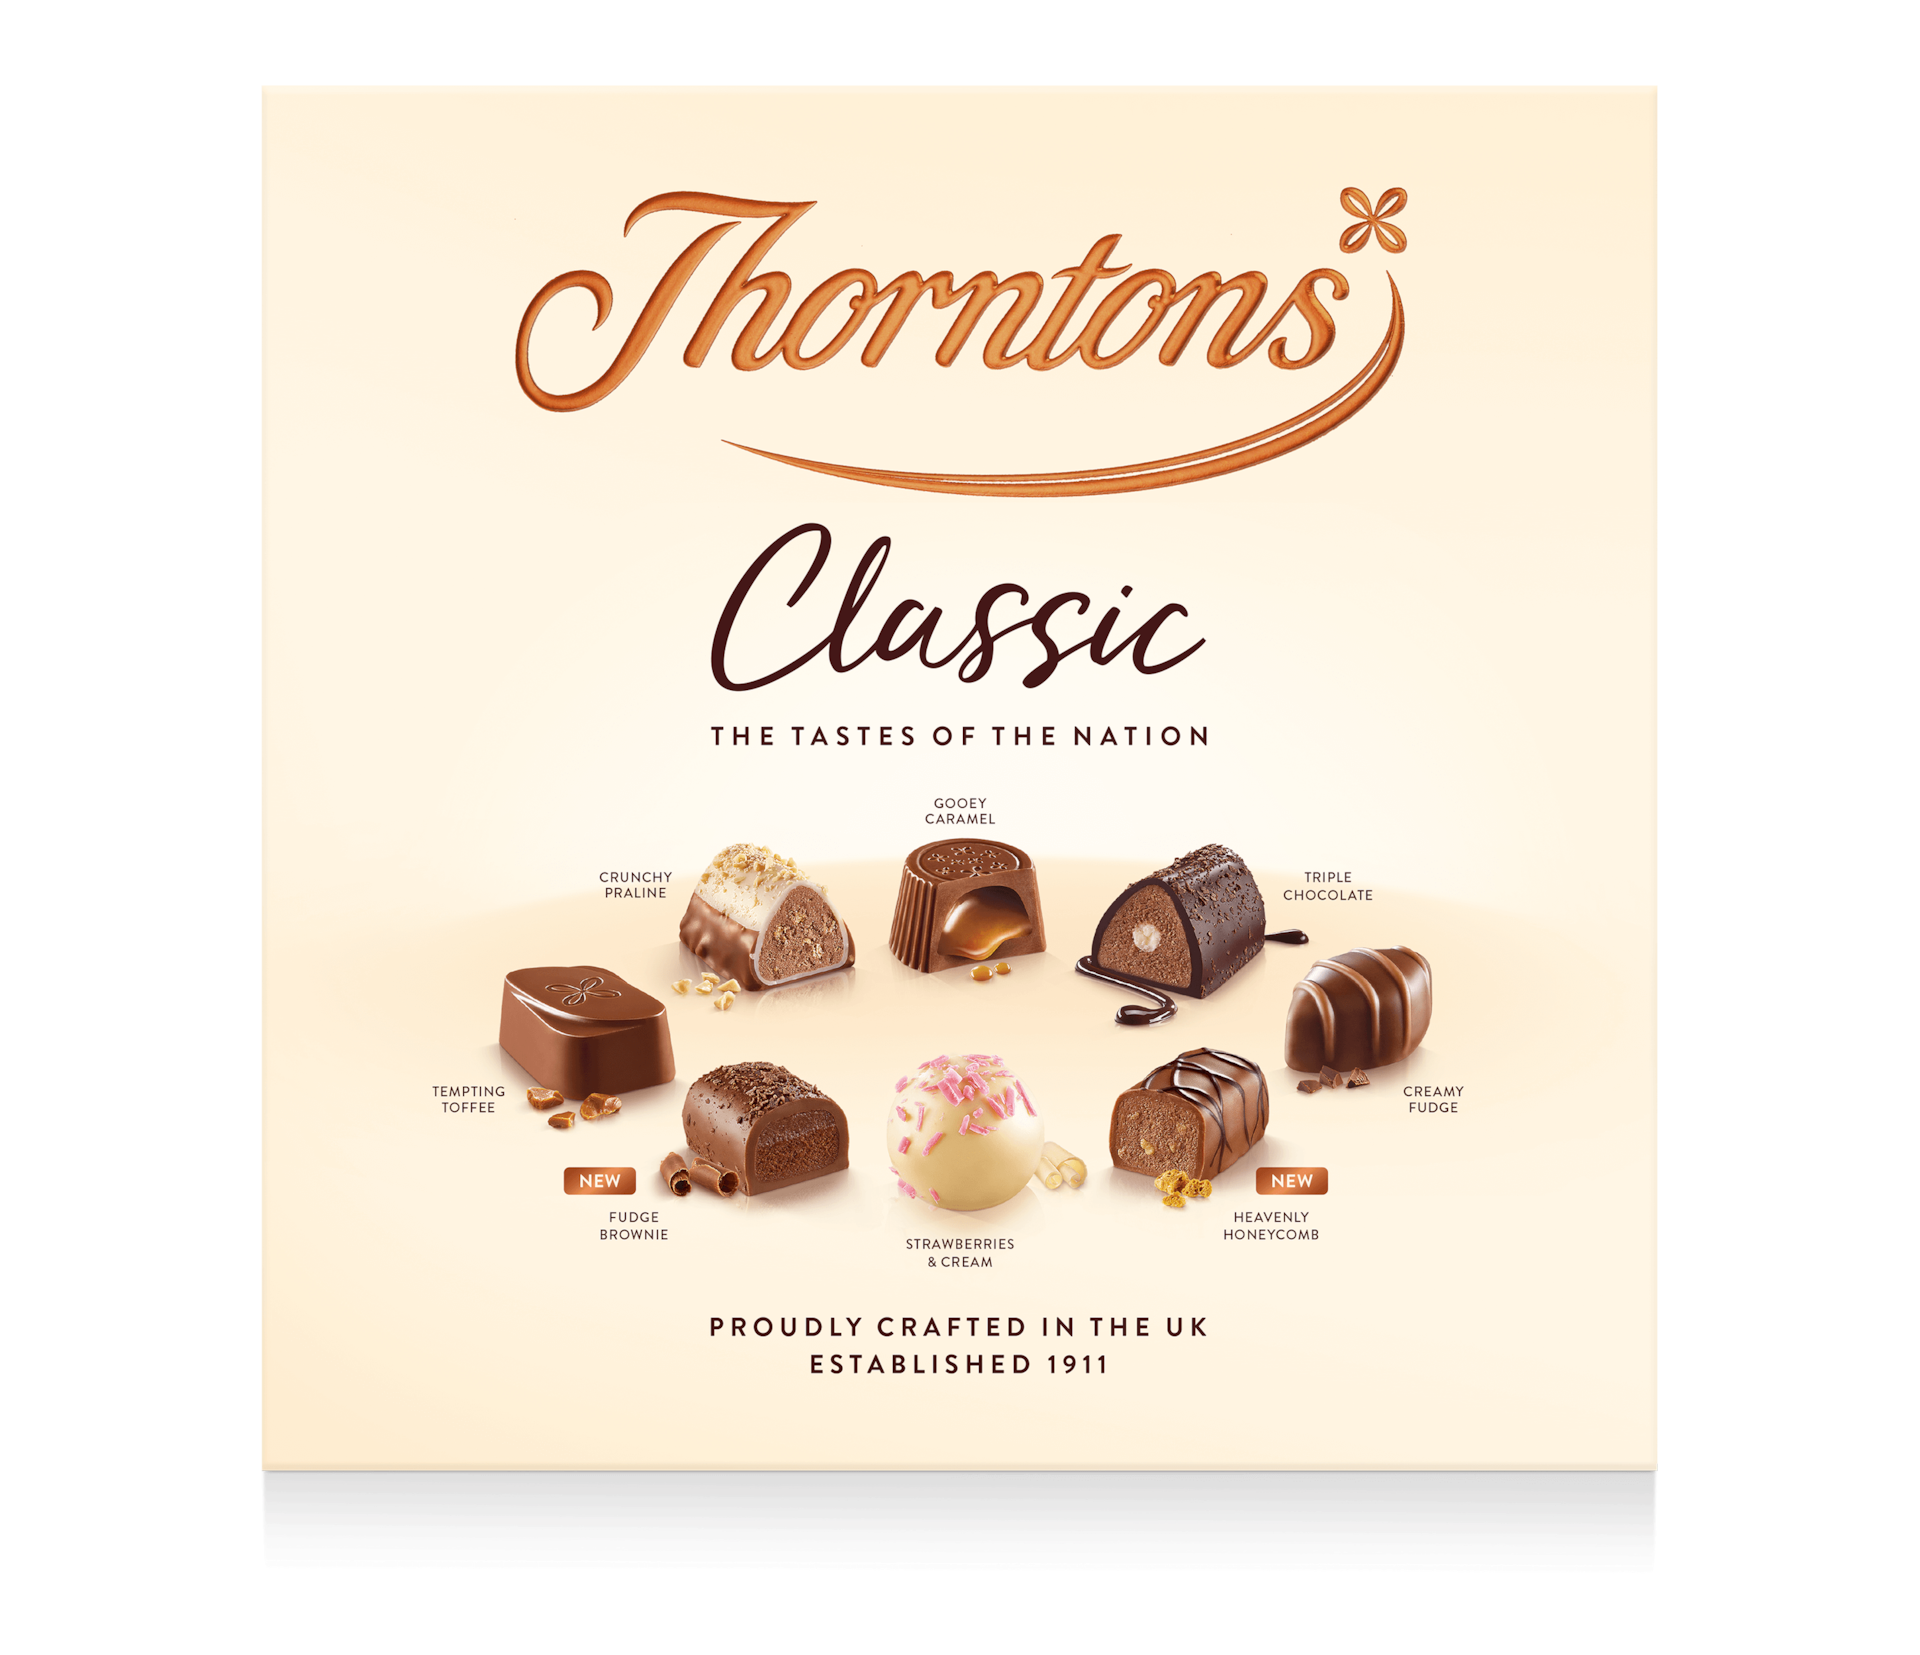 https://www.thorntons.com/medias/sys_master/images/h7a/h39/10483778912286/77242560_main/77242560-main.png?resize=xs-s-xs